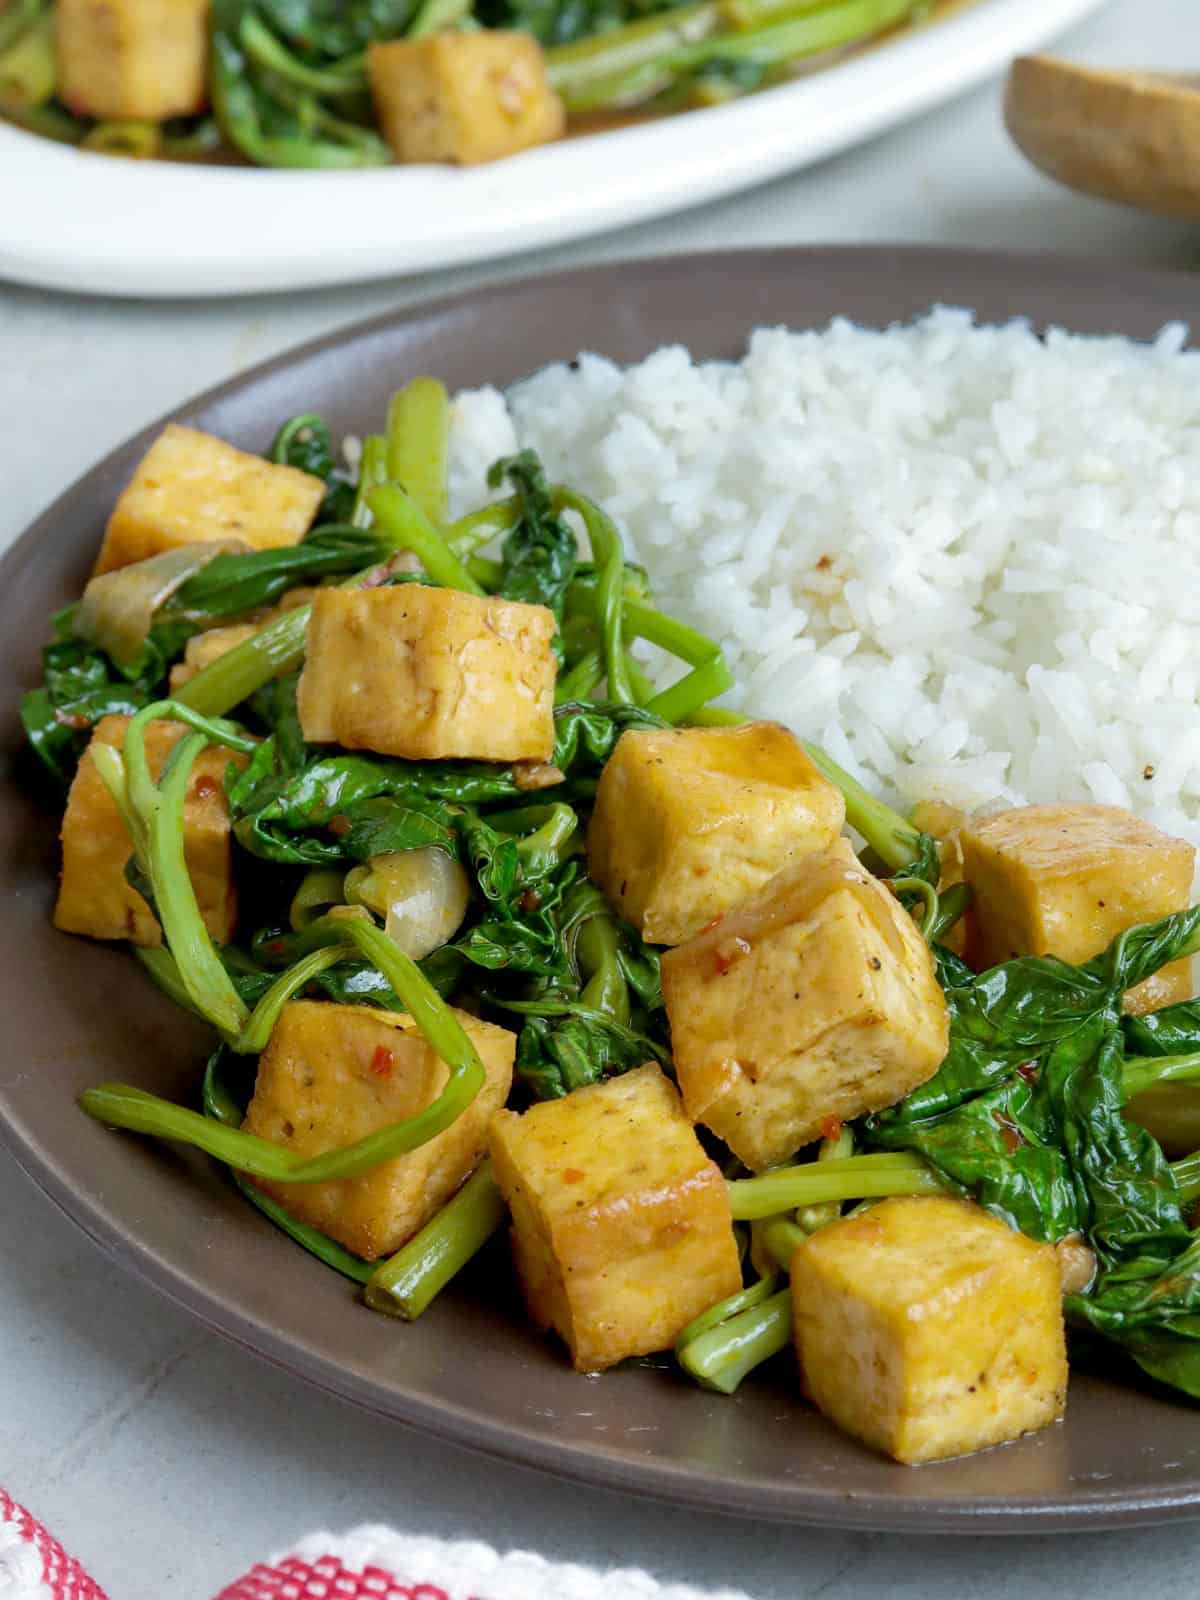 kangkong and tofu stir-fry with steamed rice on a plate